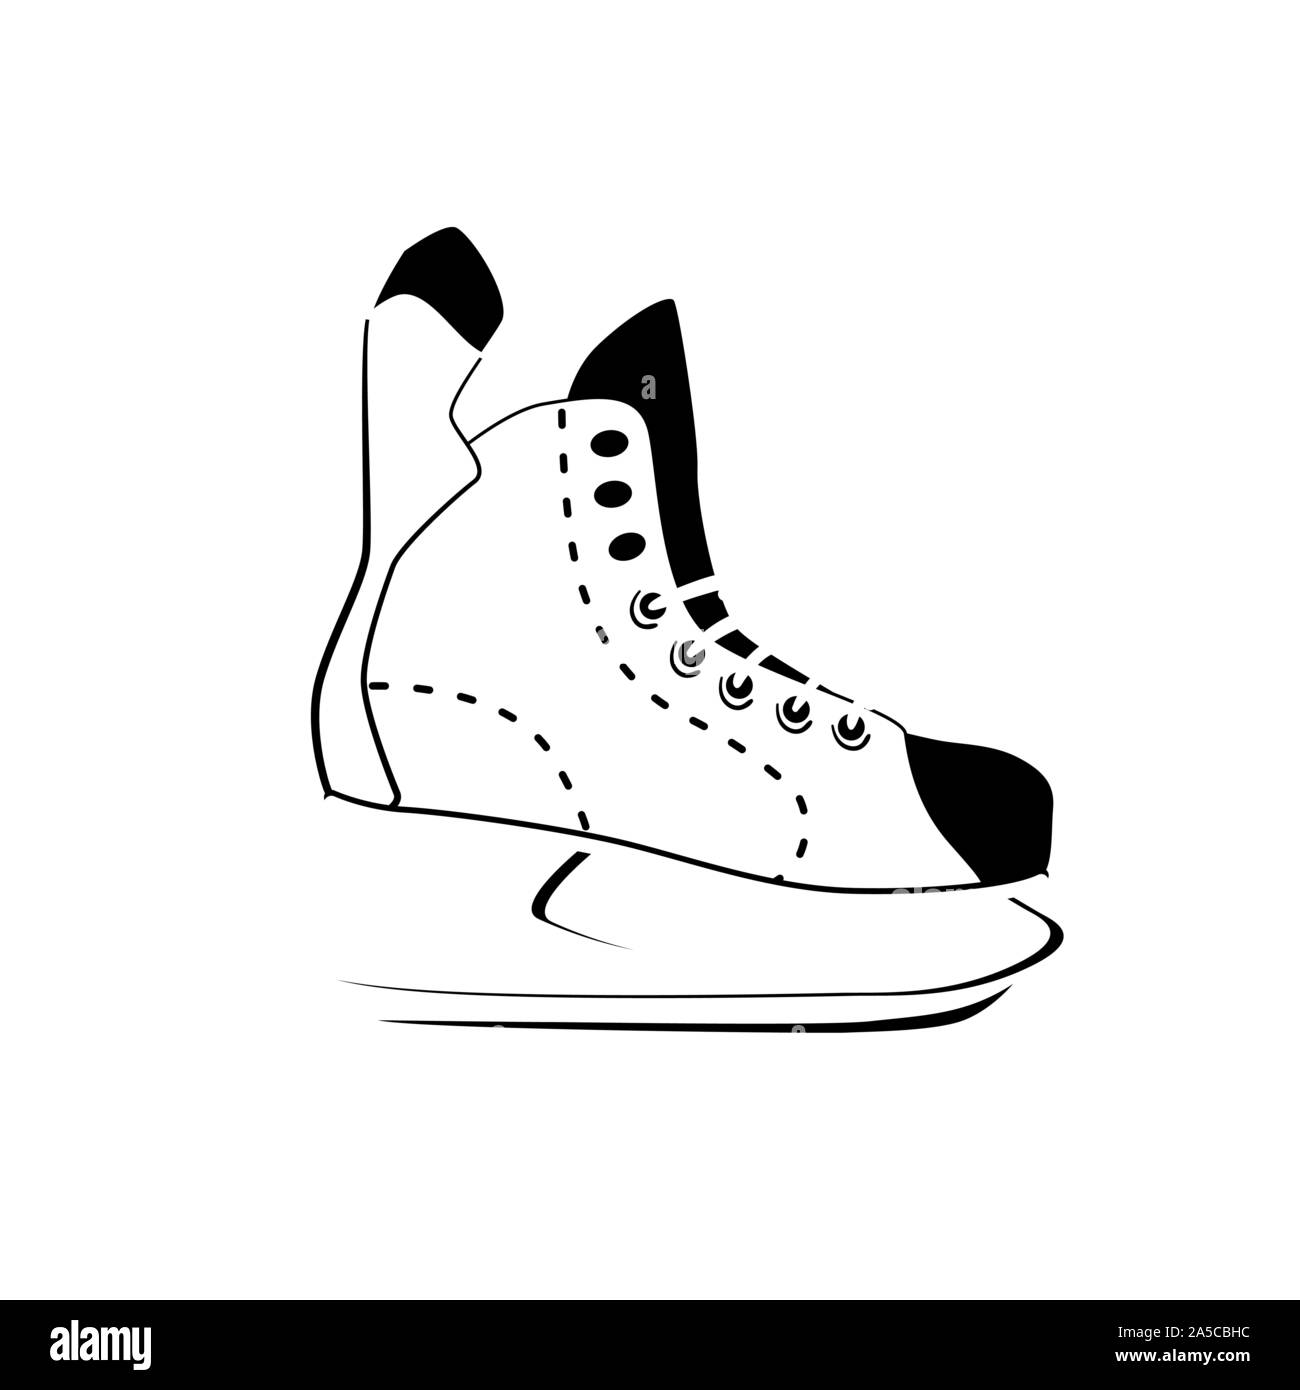 Hockey skating linear icon, winter activity and sport, outline logo ice skate sign. Stylized thin line, sketch. isolated on white background. Stock Vector